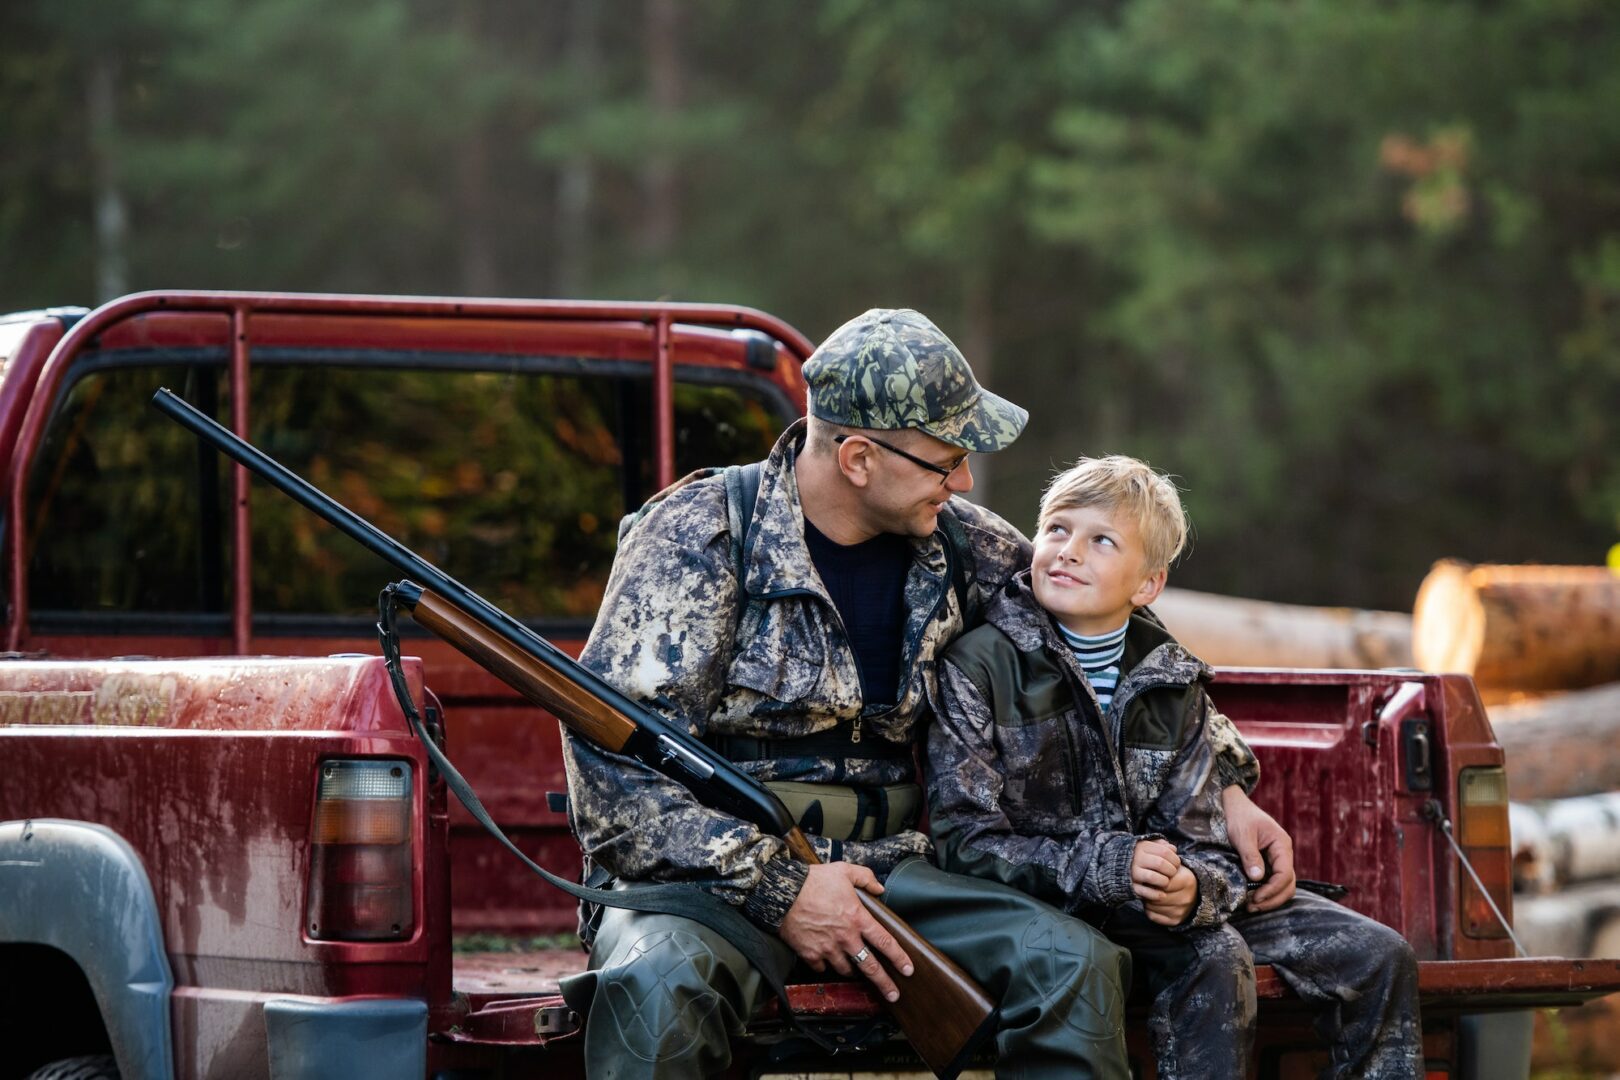 Hunter with his son during the rest sitting inside the pickup truck